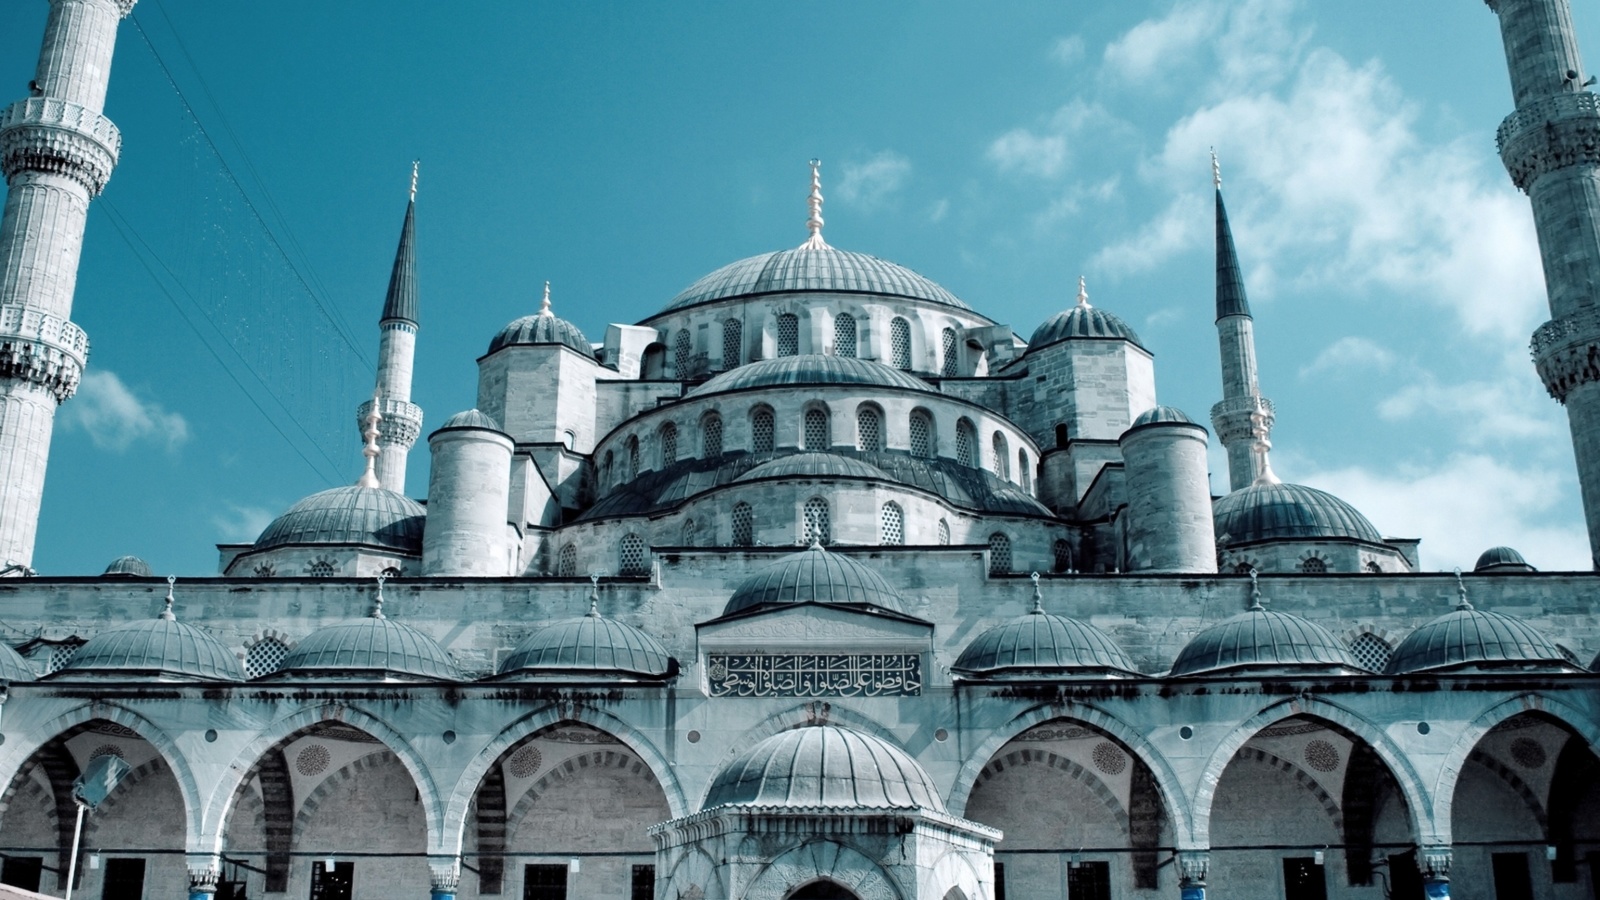 Sultan Ahmed Mosque in Istanbul screenshot #1 1600x900